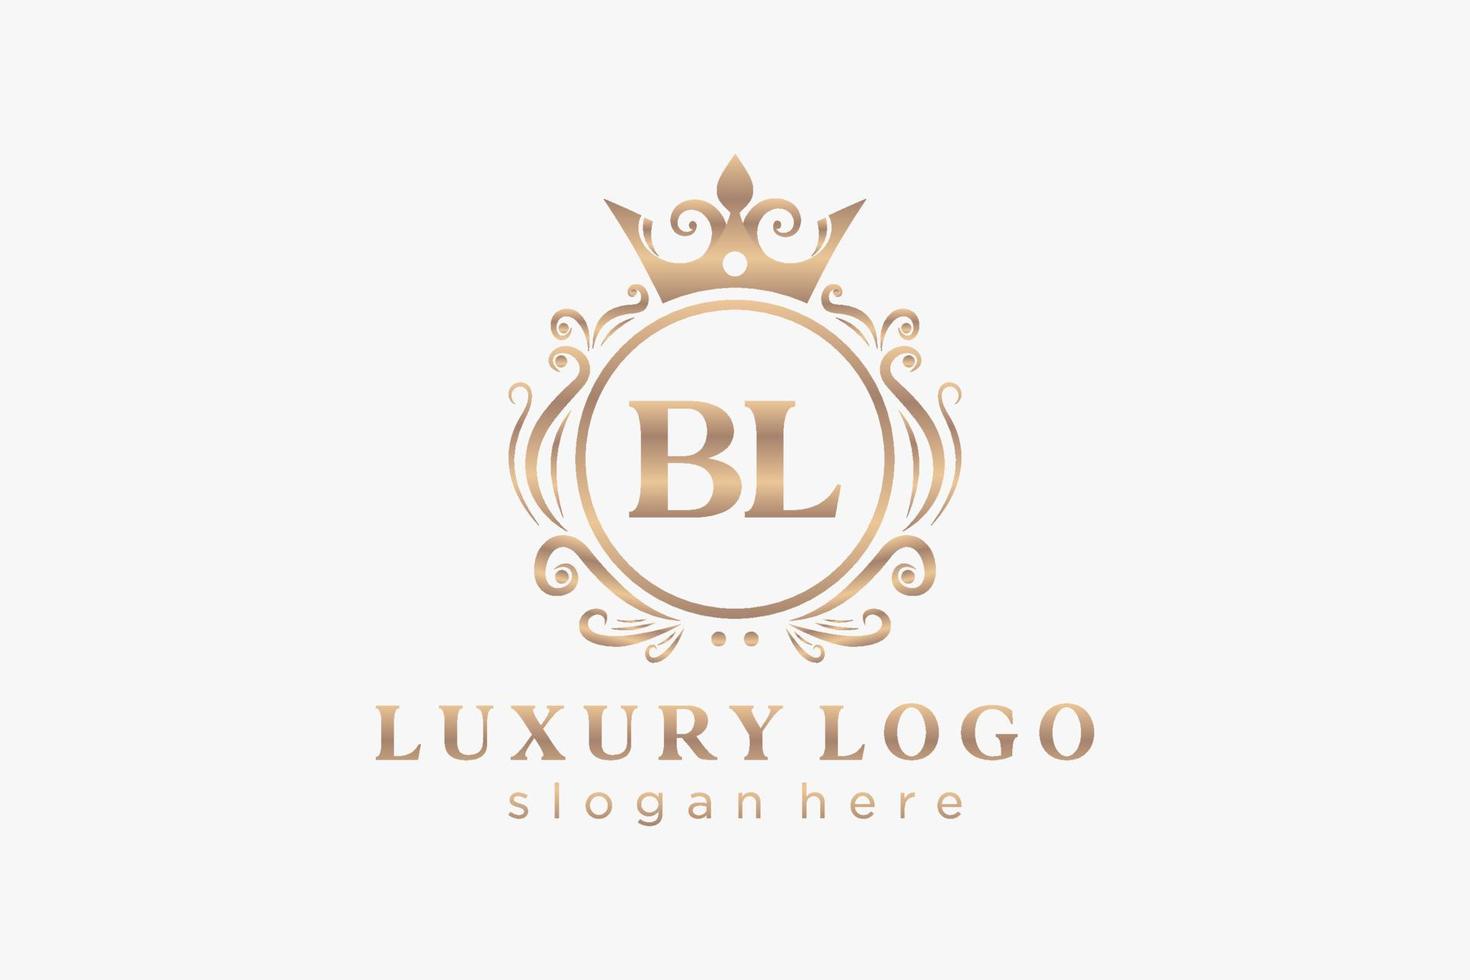 Initial BL Letter Royal Luxury Logo template in vector art for Restaurant, Royalty, Boutique, Cafe, Hotel, Heraldic, Jewelry, Fashion and other vector illustration.